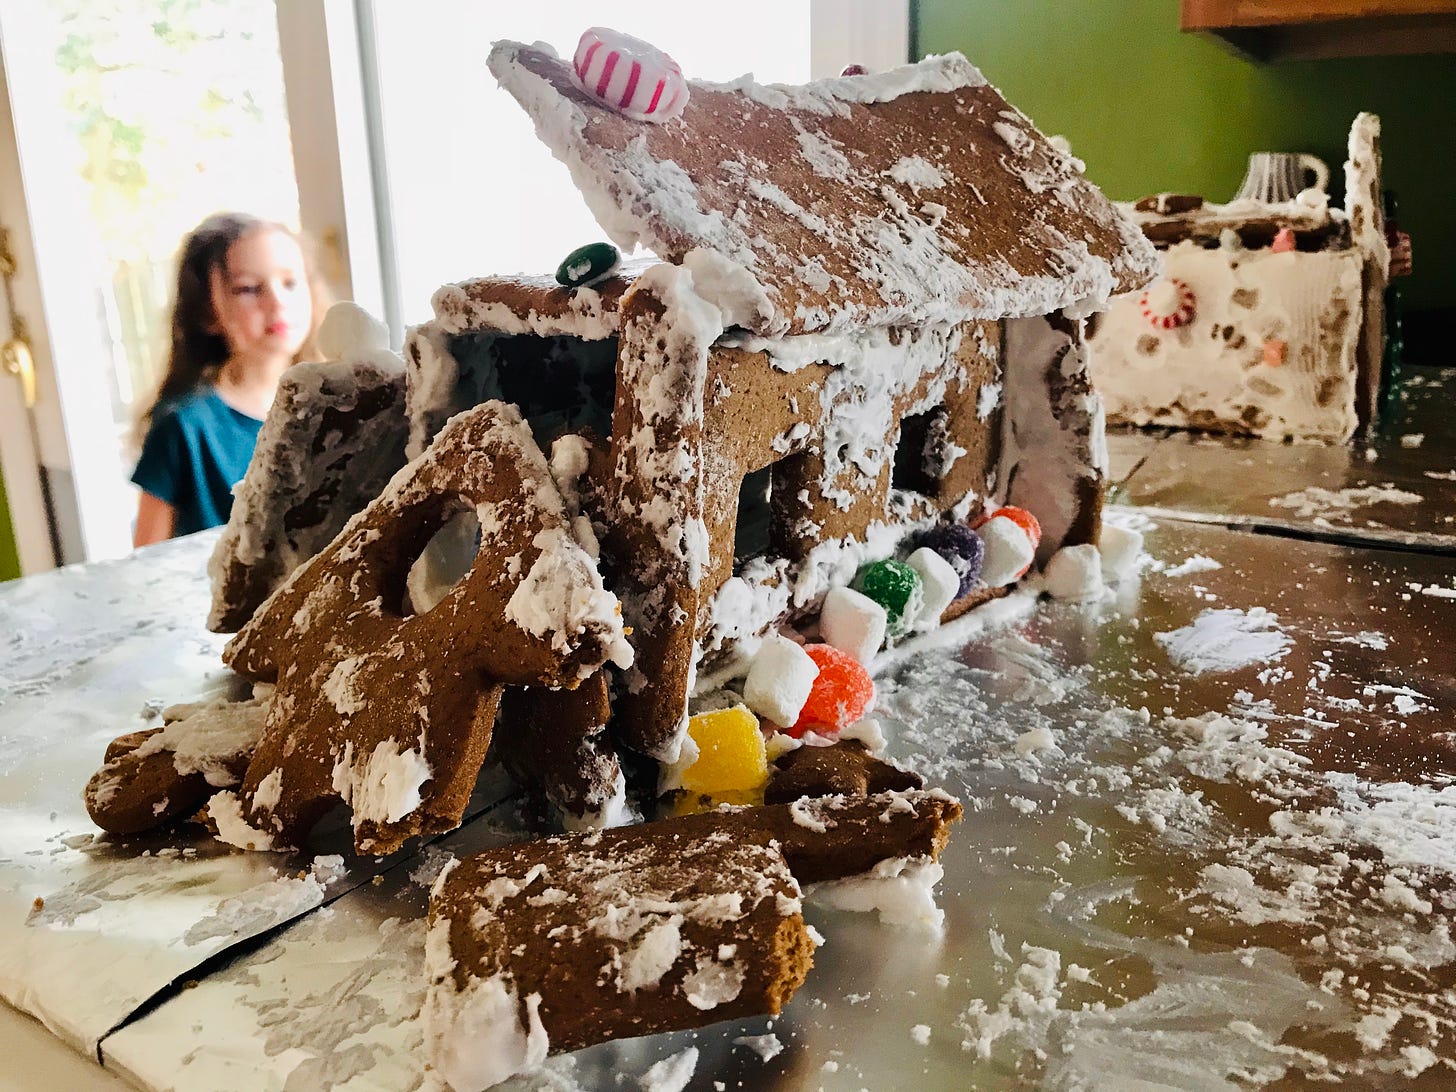 A gingerbread house collapsed on aluminum foil. Behind it, a blurry child and a backlit window.